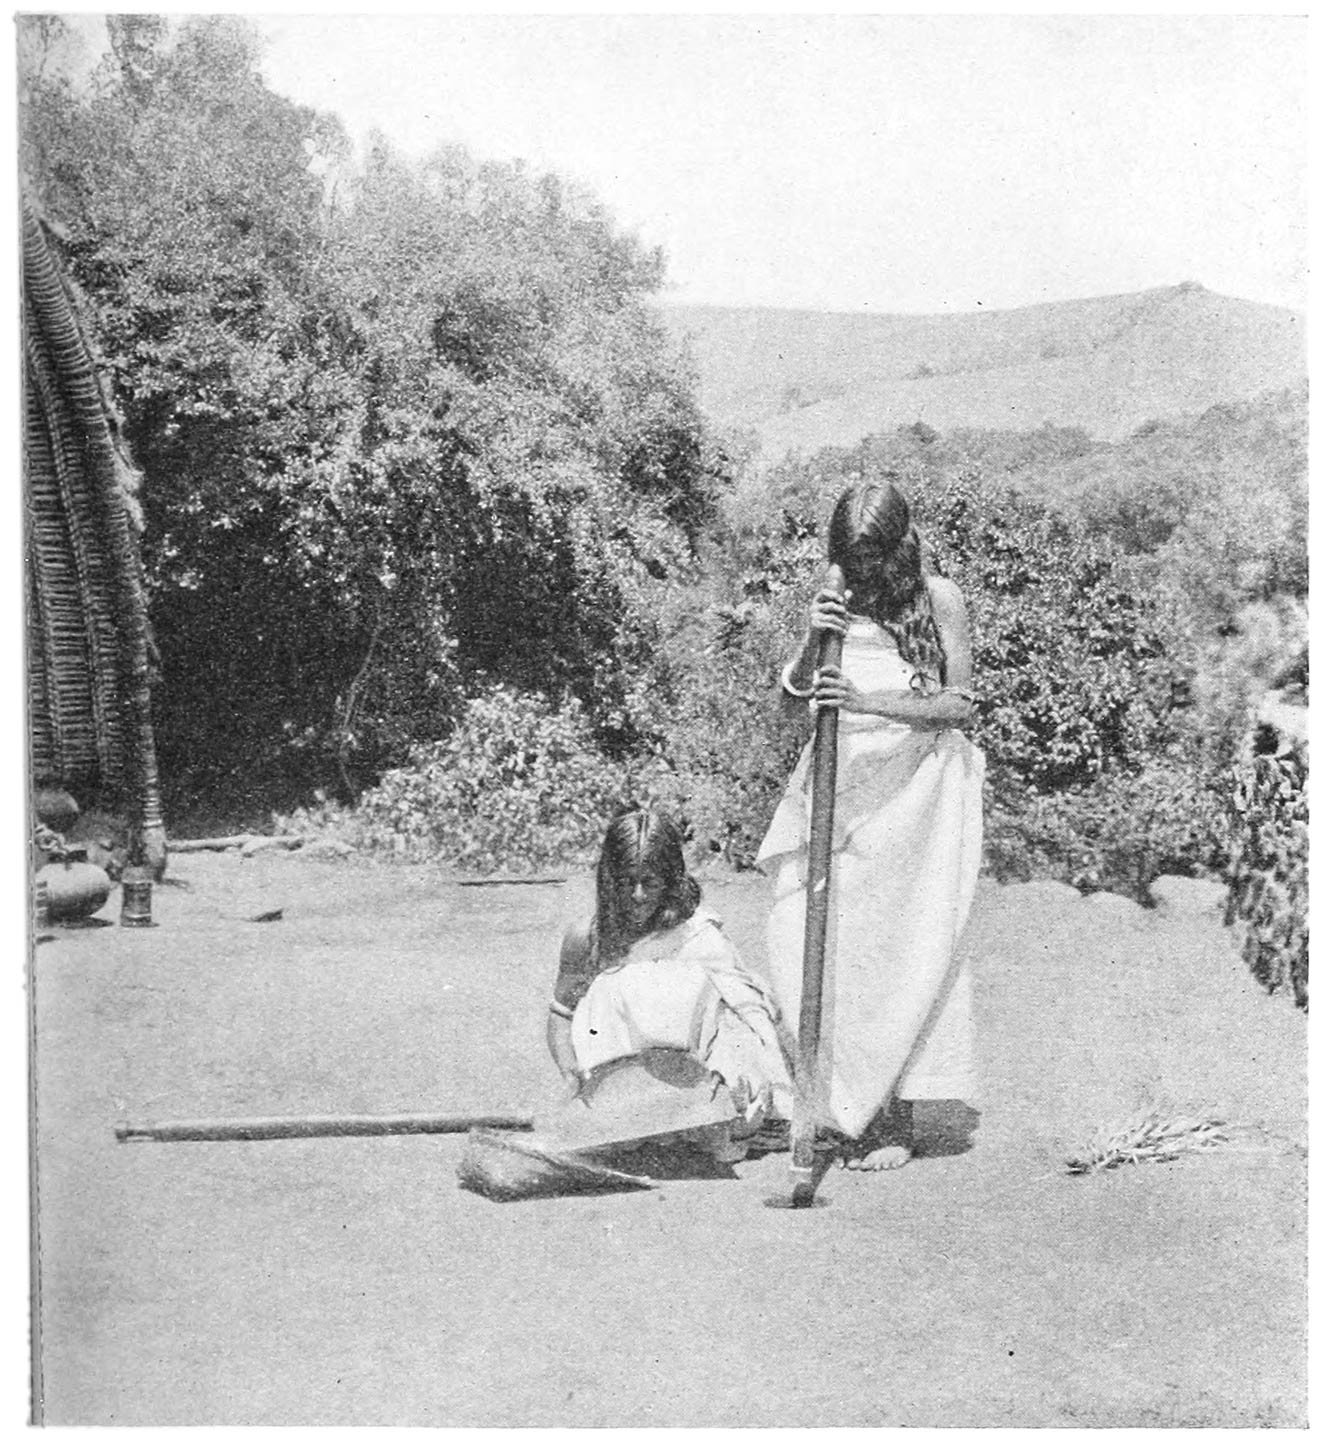 FIG. 11.—WOMEN POUNDING AND SIFTING. THE BROOM IS ON THE GROUND TO THE RIGHT.